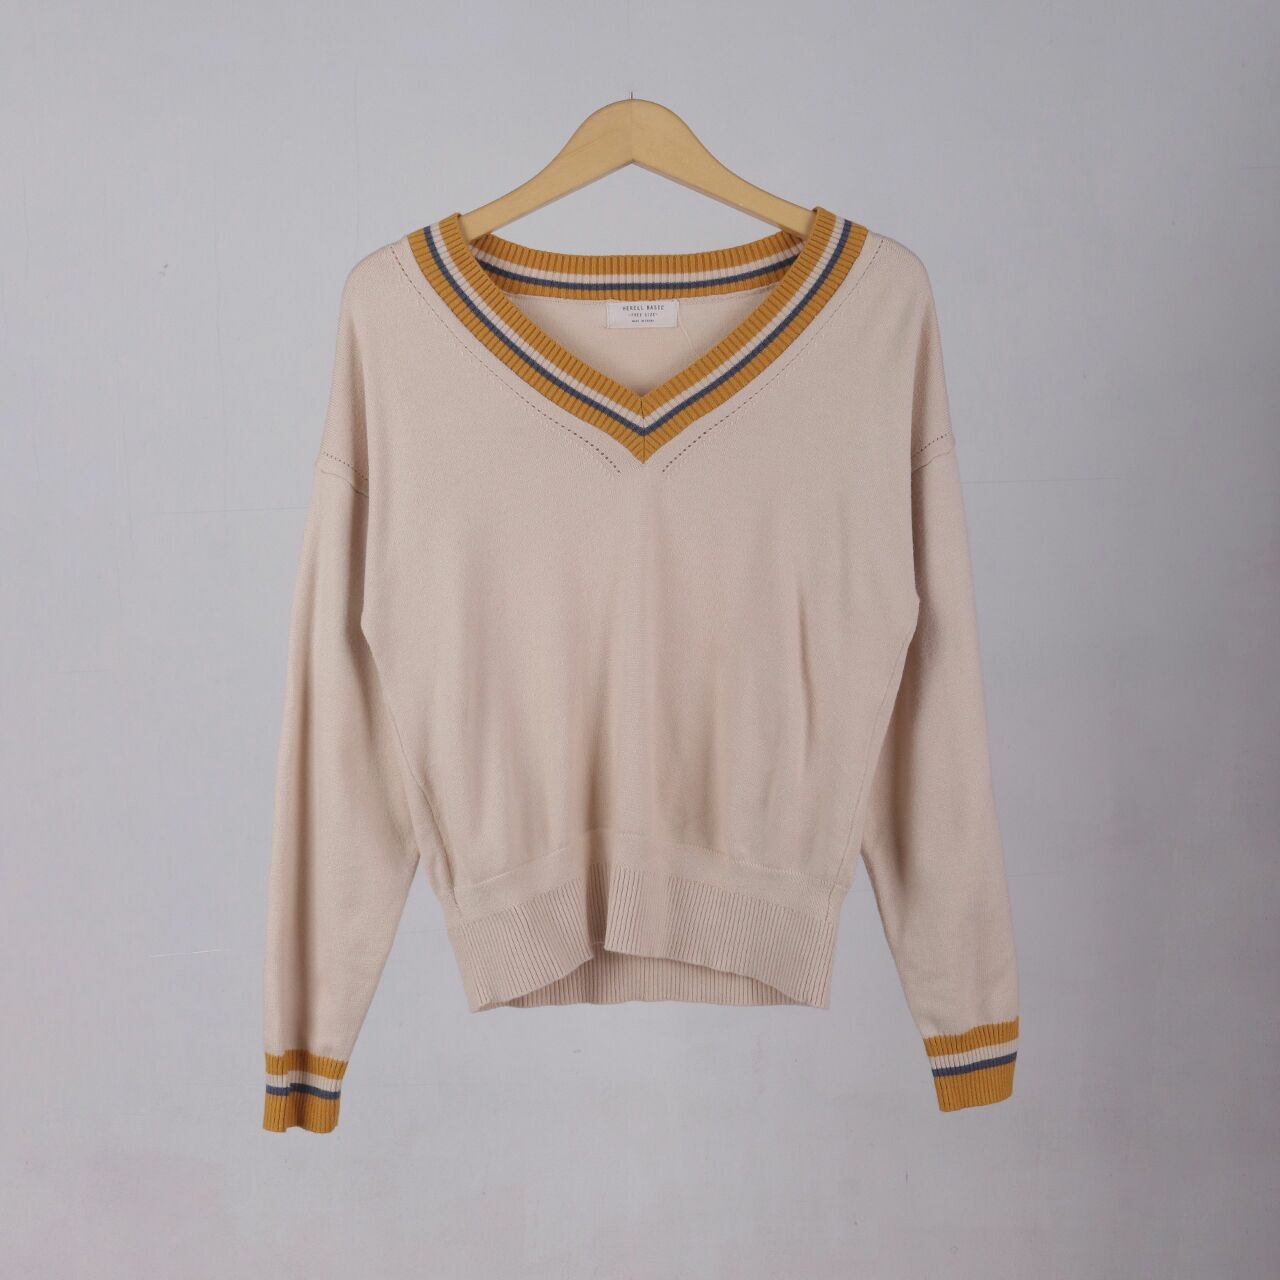 Herell Beige Blouse